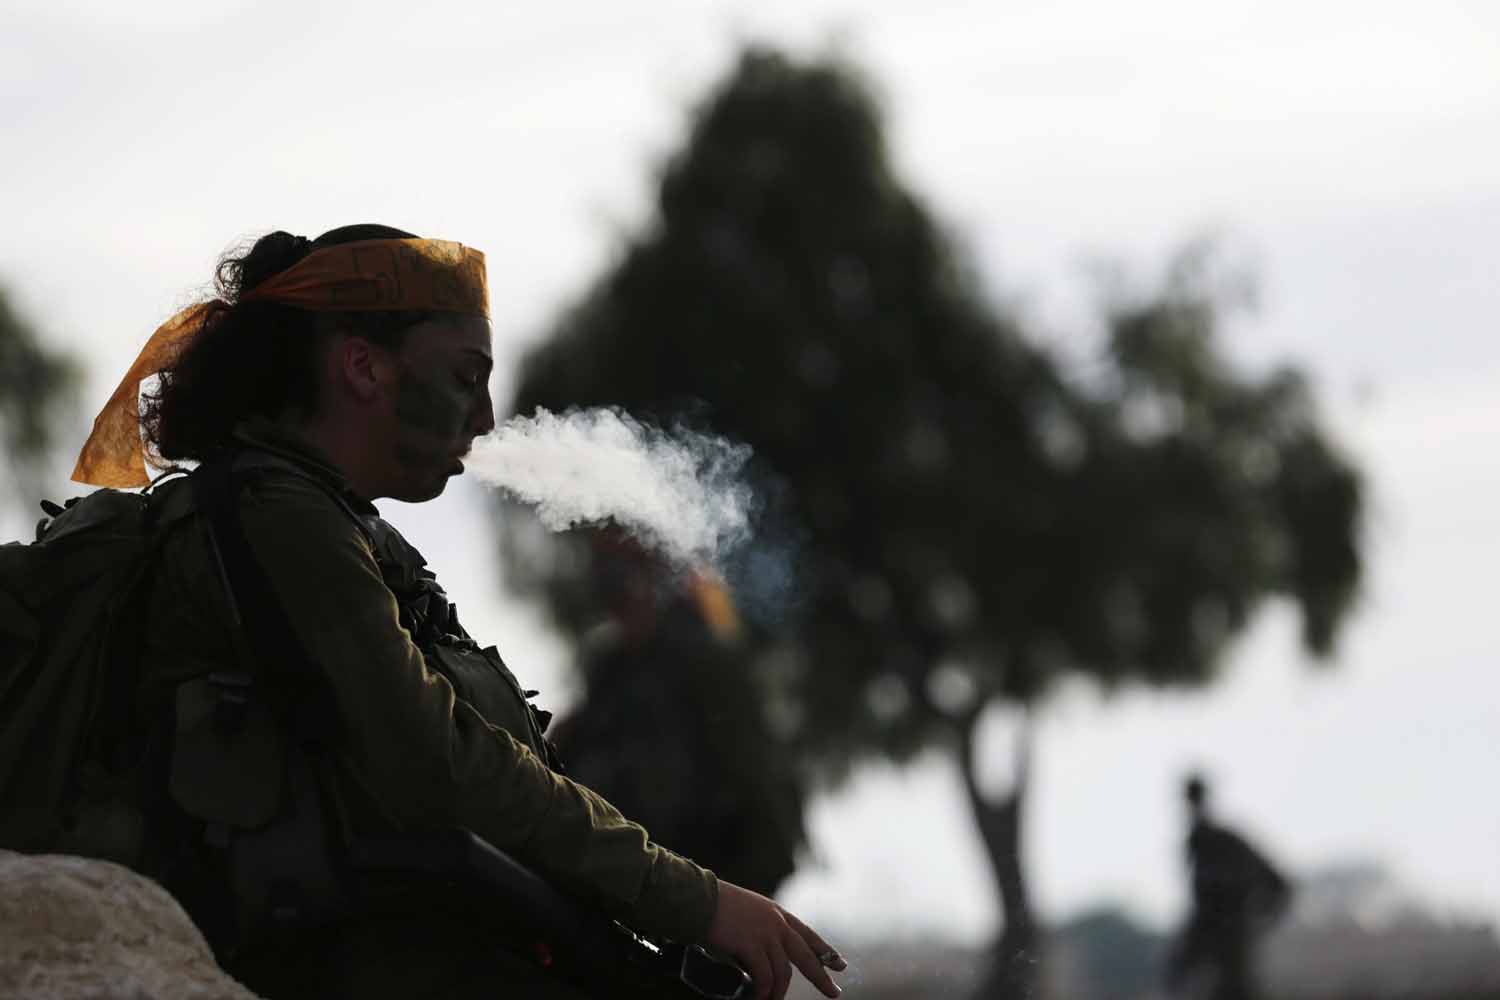 An Israeli soldier of Caracal battalion smokes after finishing a march in Israel's Negev desert